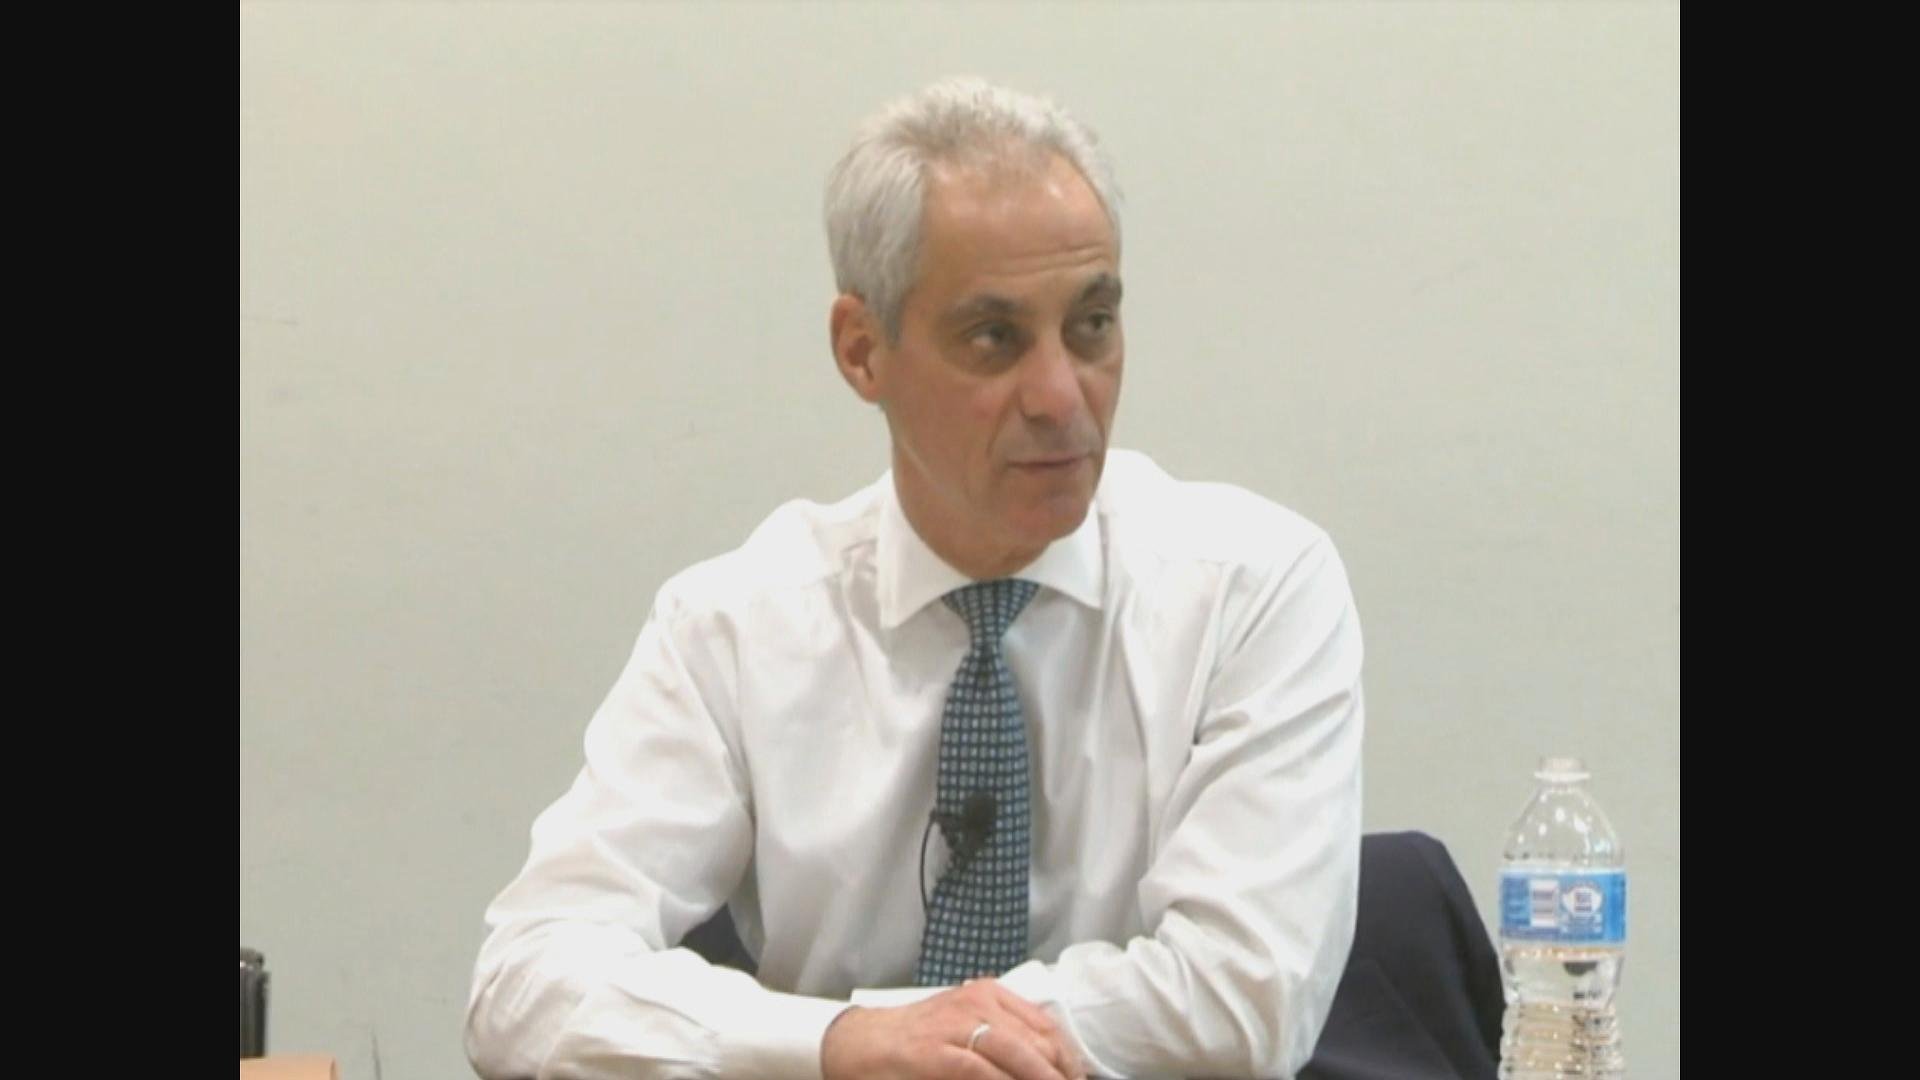 Mayor Rahm Emanuel is deposed in March as part of an investigation into the 2015 shooting death of West Side teen Quintonio LeGrier and his neighbor Bettie Jones by a Chicago police officer. (Courtesy City of Chicago) 